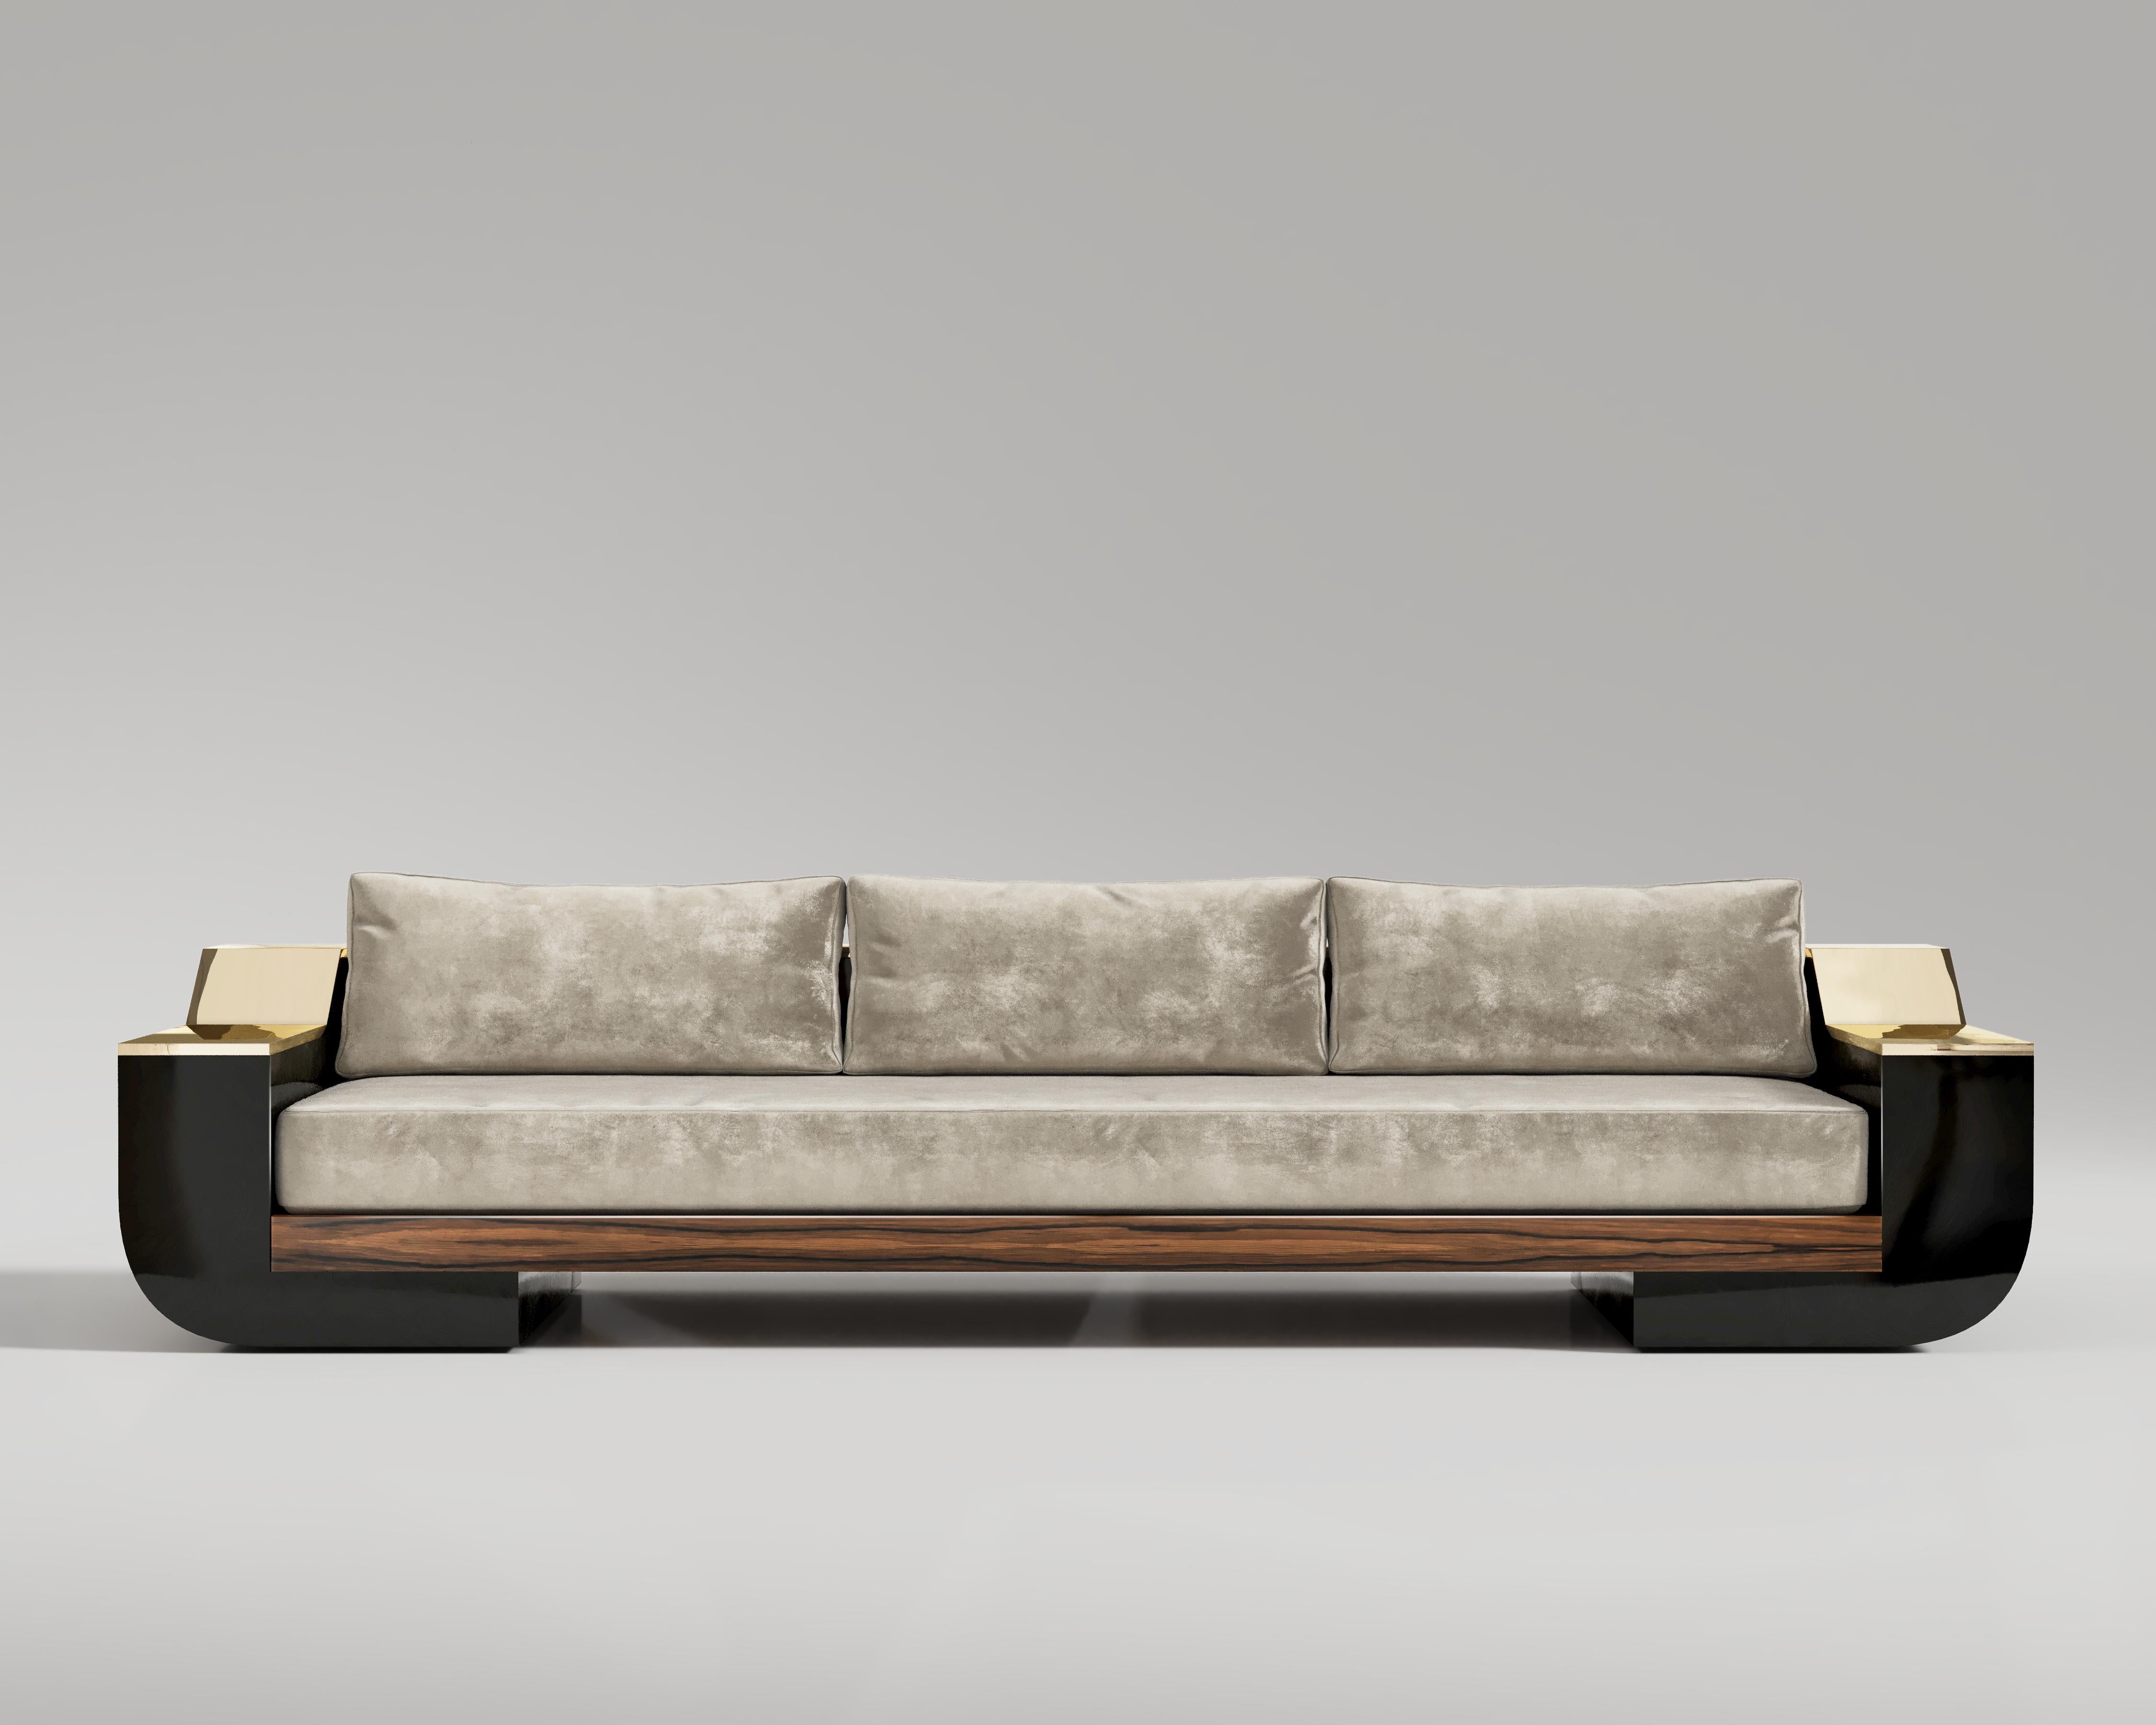 Meilleur Nom Sofa

Open your senses to the enticing shape of the Meilleur Nom Sofa which adds visual elegance. Much like the grandeur of Italian design, Meilleur Nom is especially suited for large luxury spaces with more width than the average sofa,